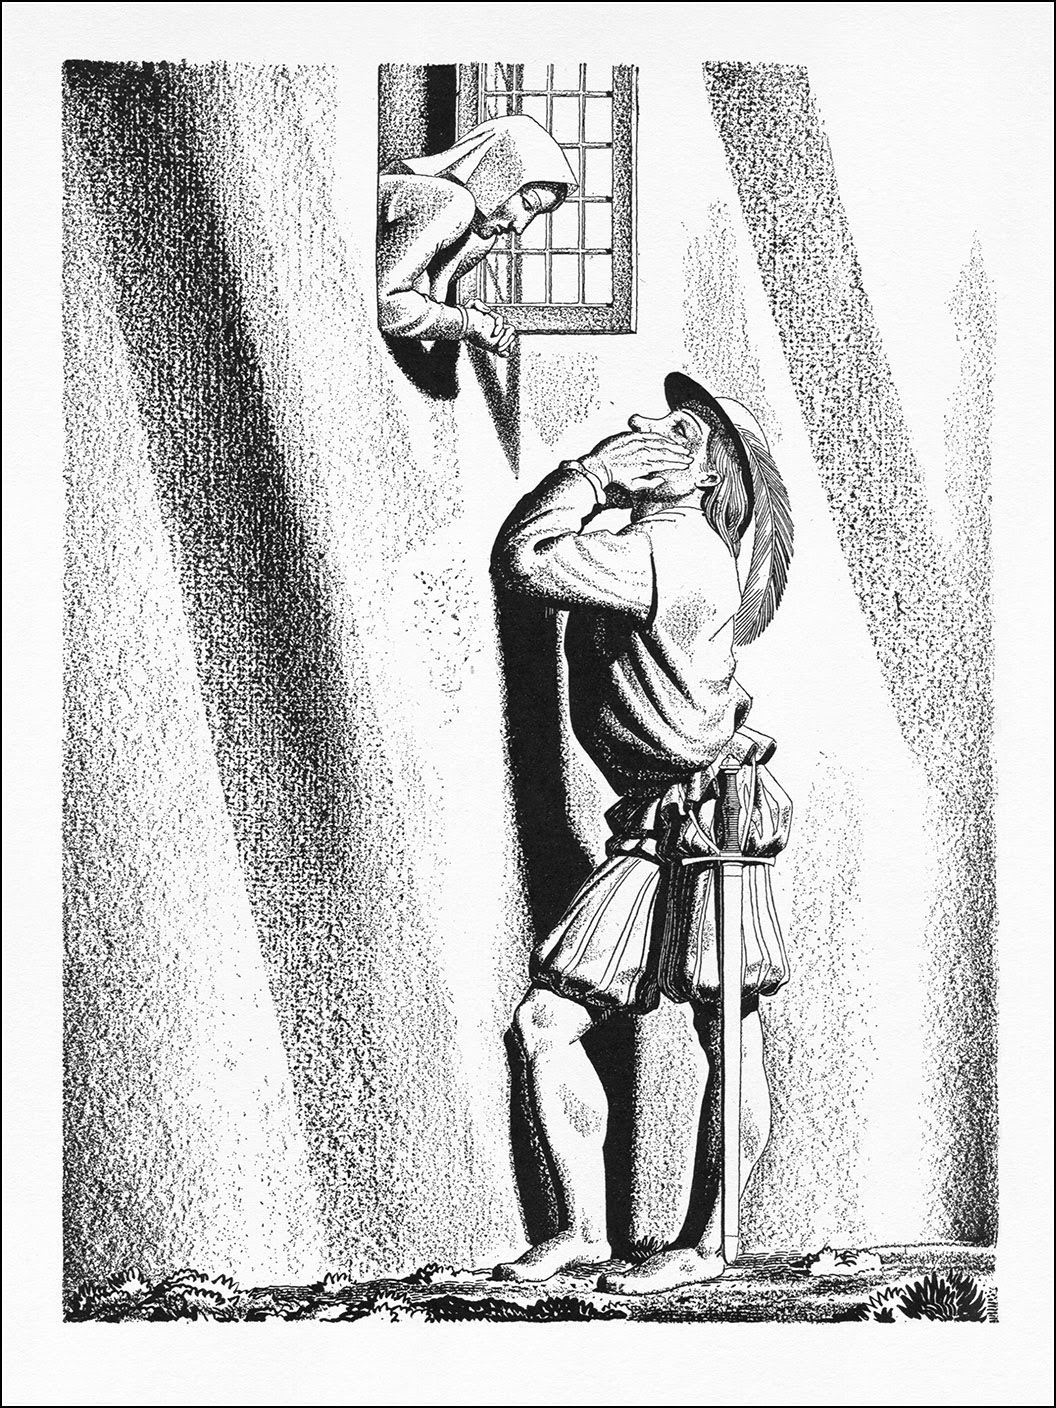 Rockwell Kent, The complete works of William Shakespeare